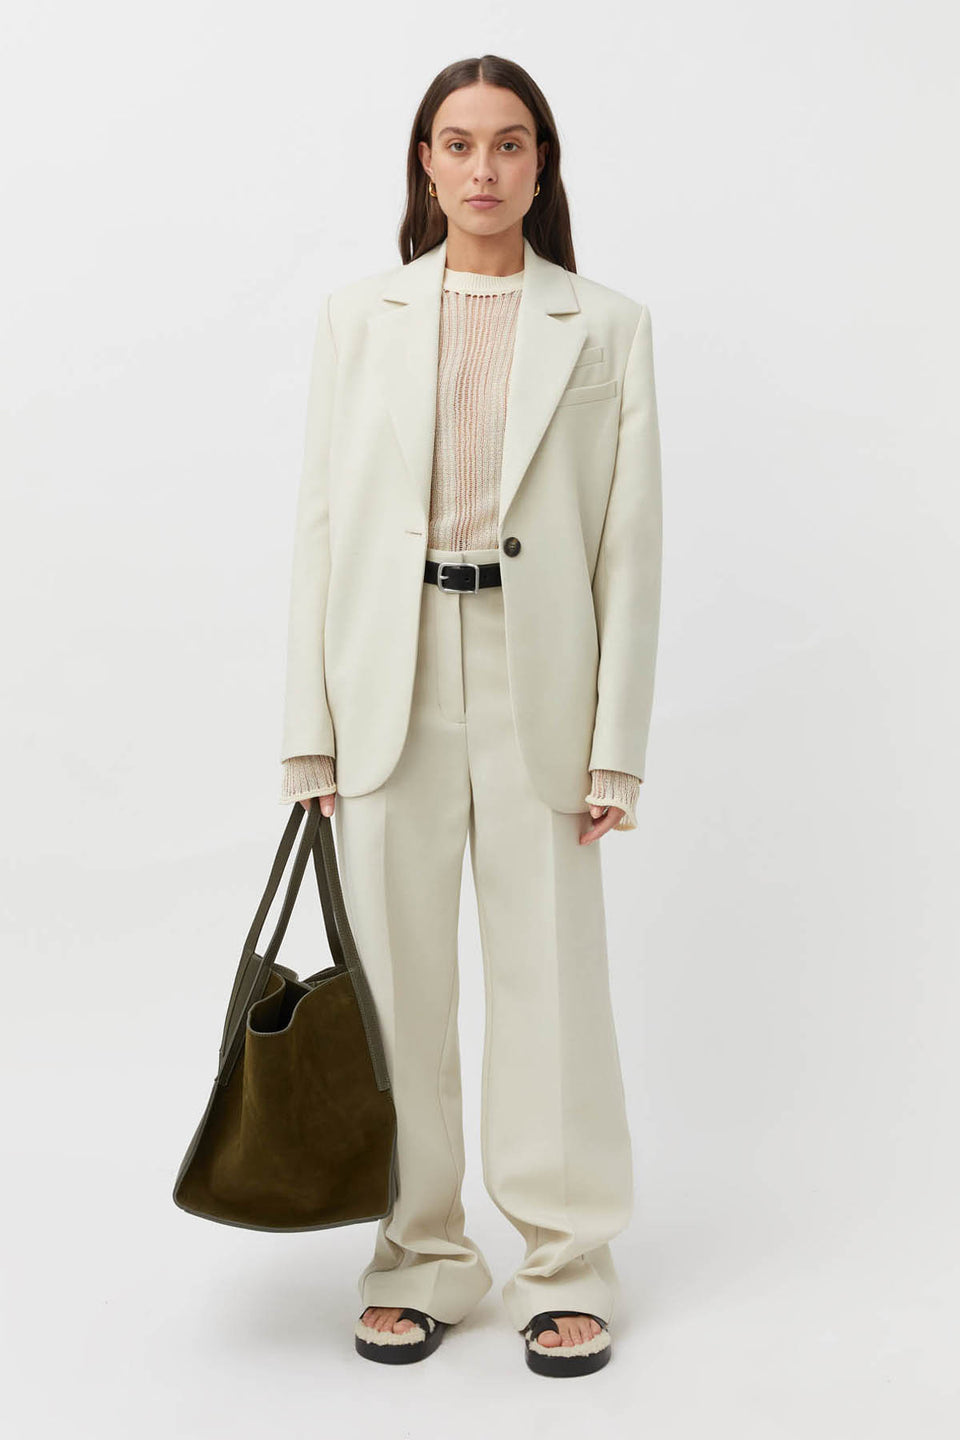 Womens Tailored Pant Suits, Blazers & Trousers | C&M | CAMILLA AND MARC ...